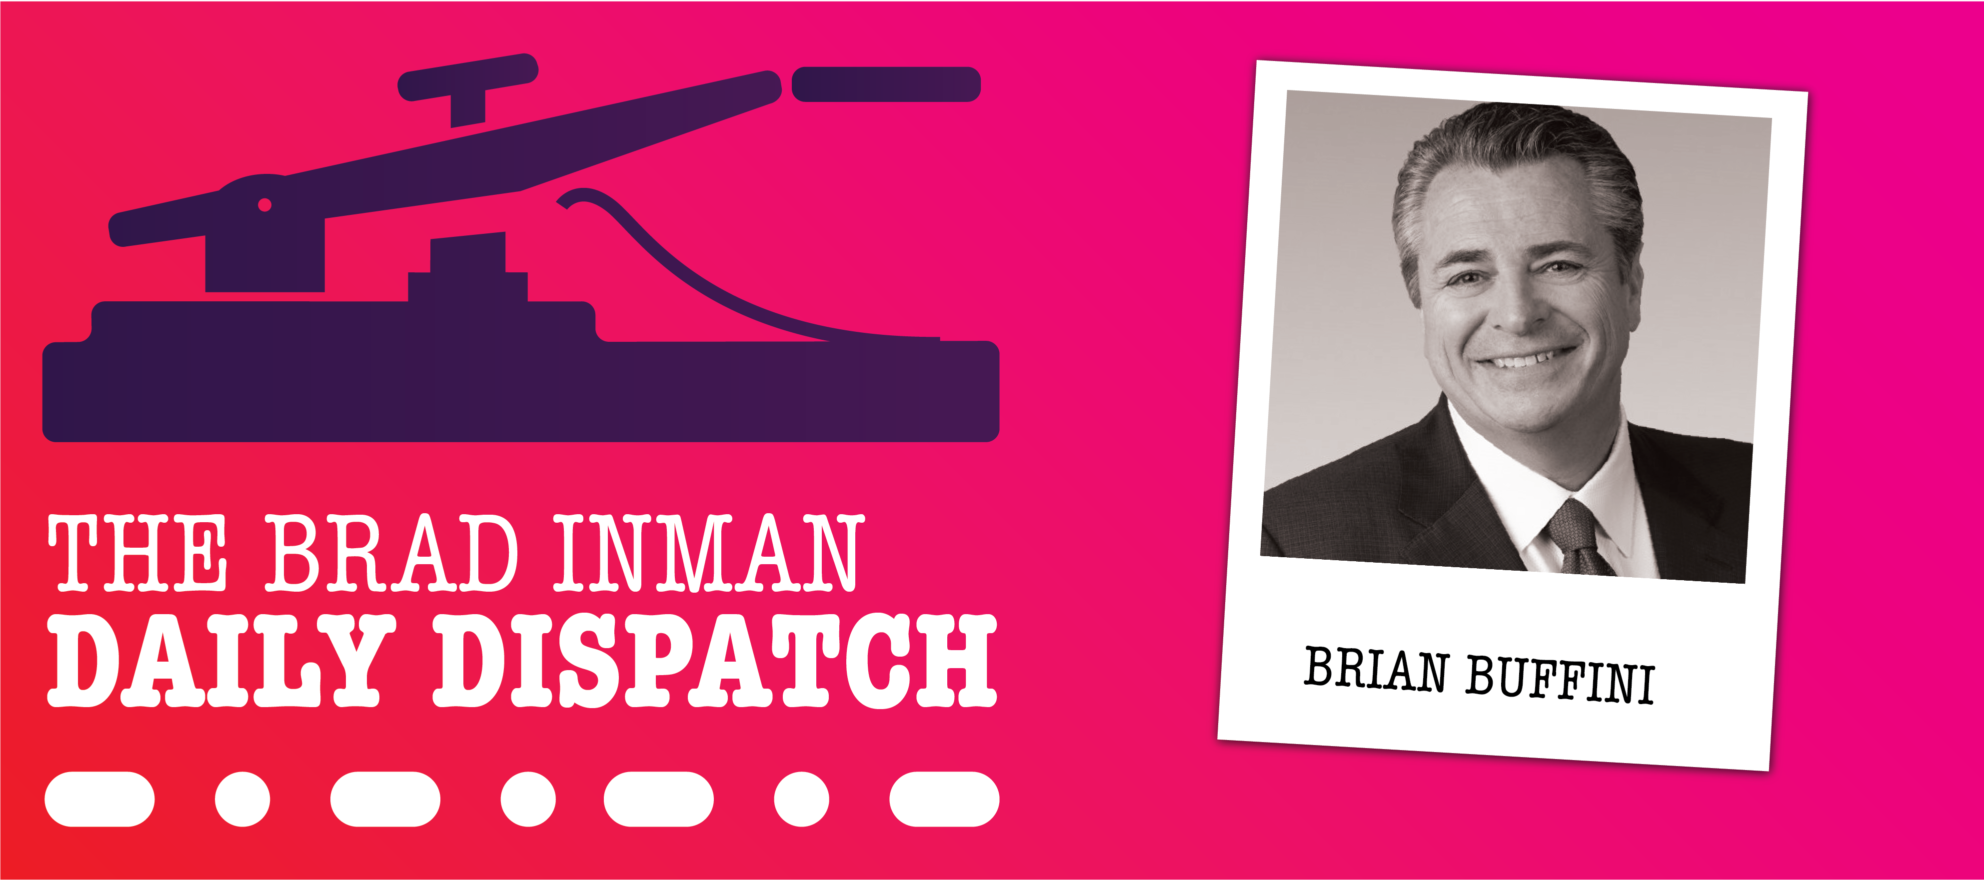 daily dispatch graphic logo with image inlay of brian buffini